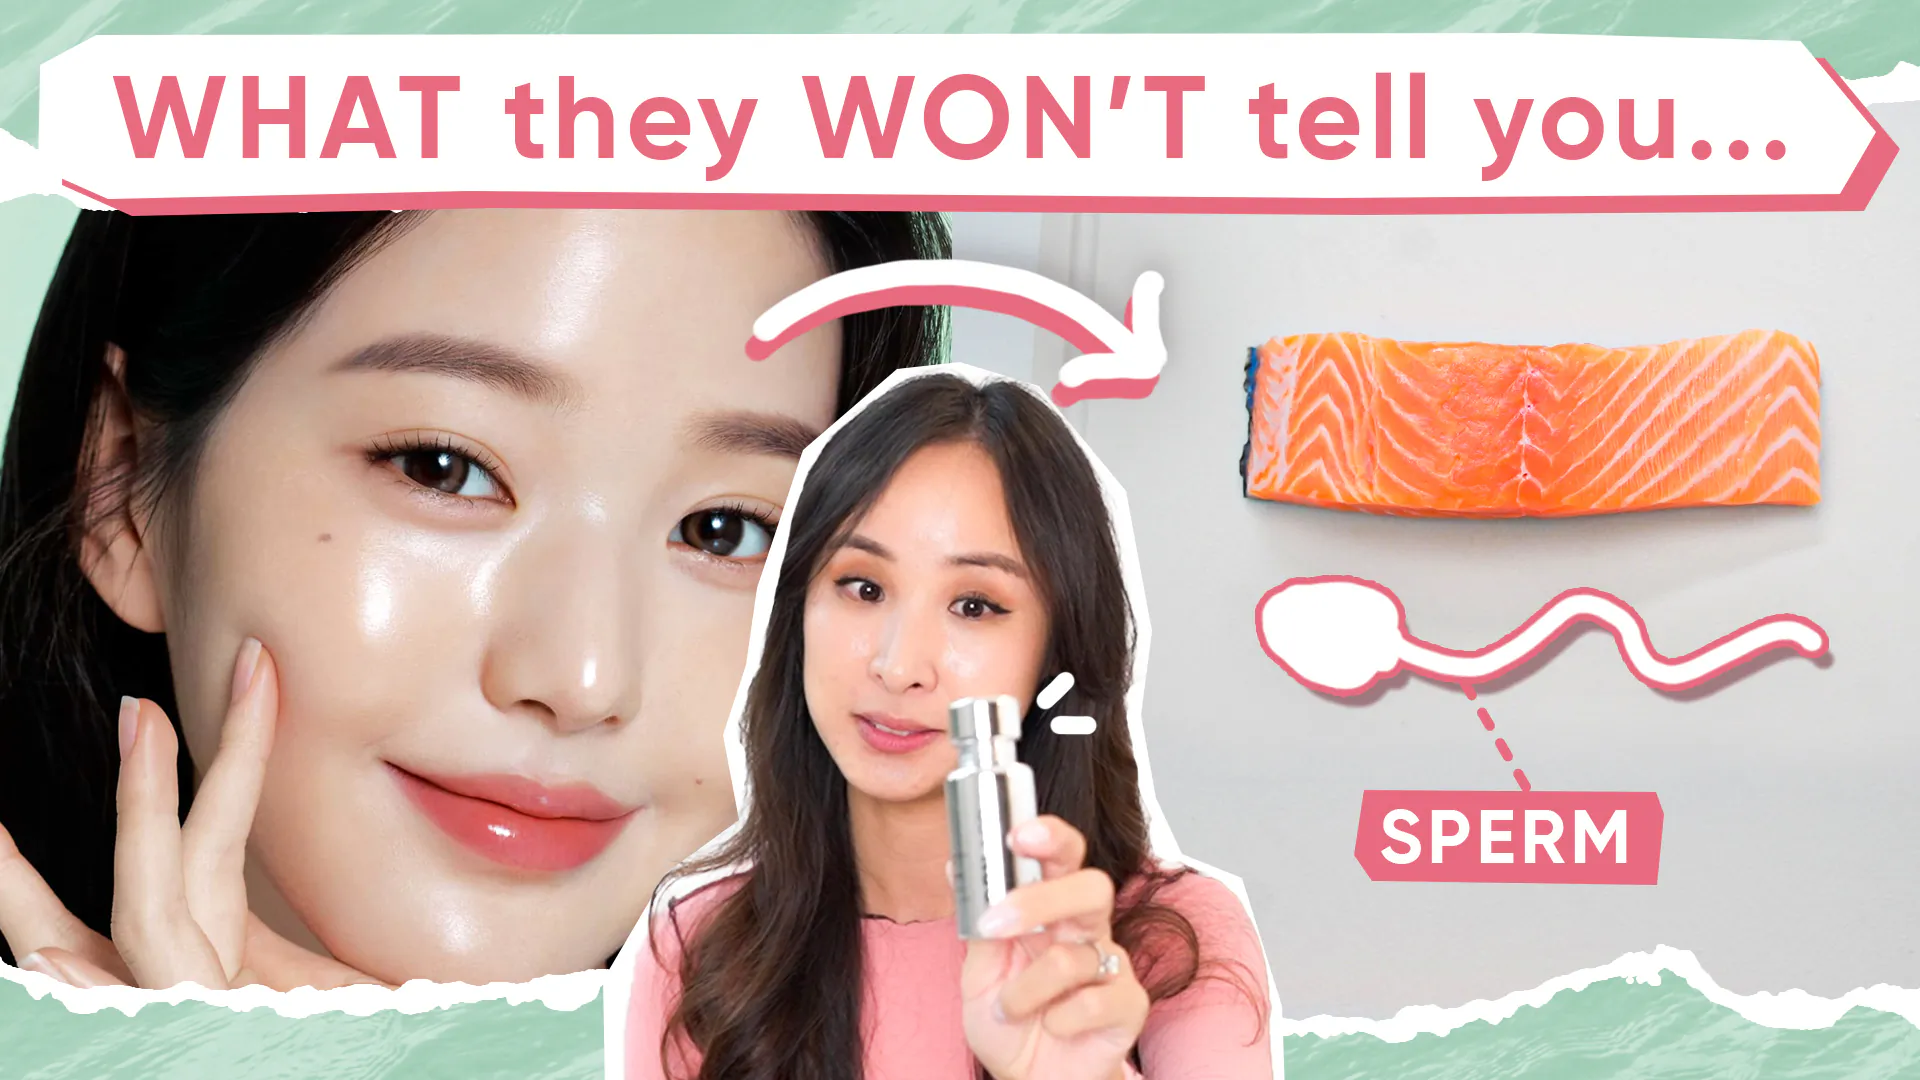 1 Unexpected Thing Koreans Do for Perfect Skin + Giveaway!